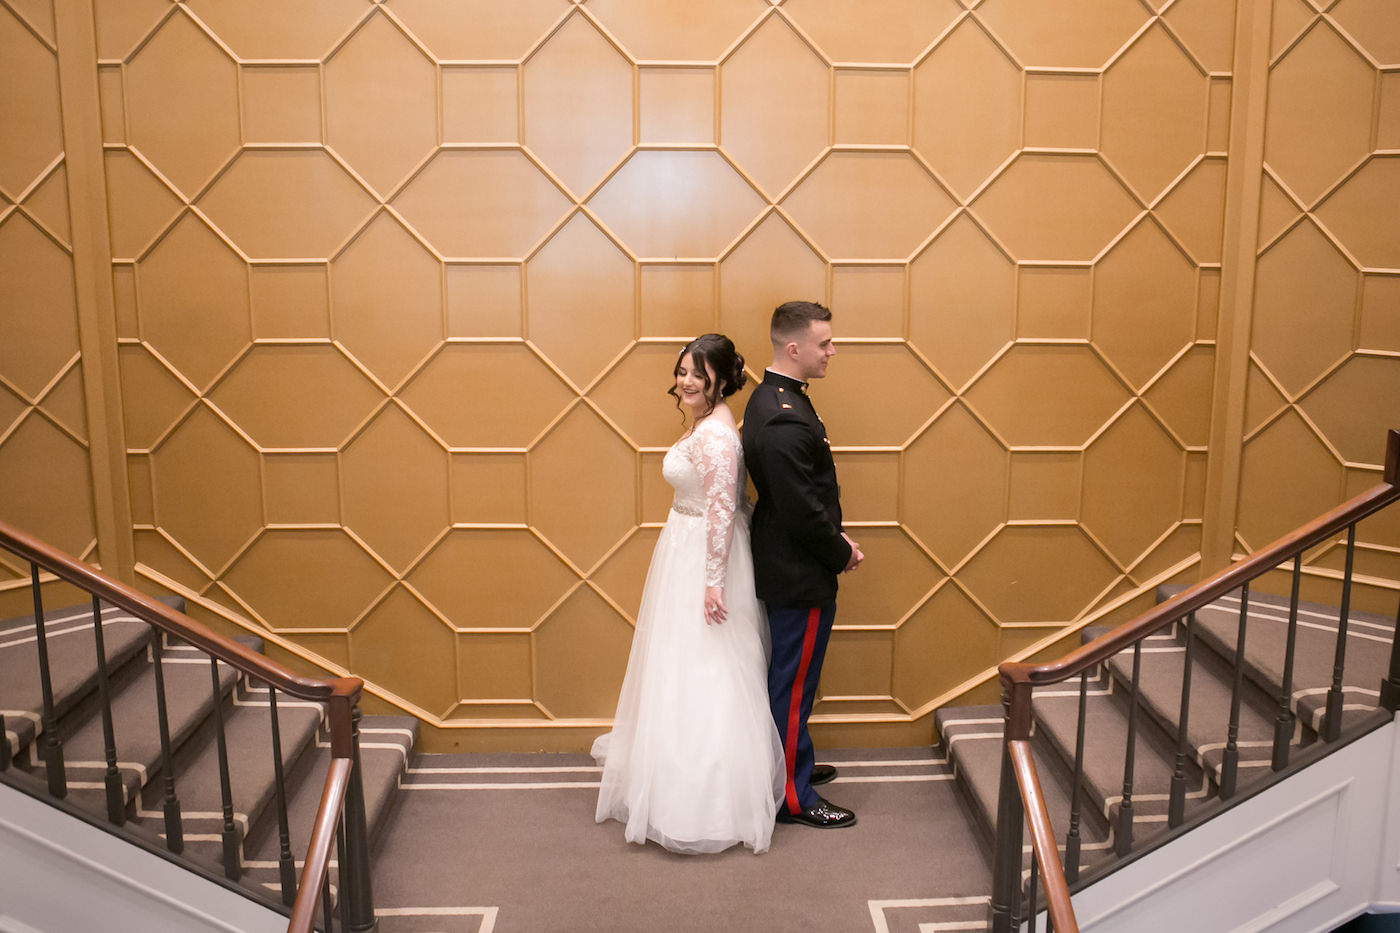 Florida Bride in Whimsical Empire Waist Long Sleeve Lace and Tulle Wedding Dress Back to Back with Military Groom in Dress Blues Uniform on Staircase at Wedding Venue The Tampa Club | Wedding Photographer Carrie Wildes Photography